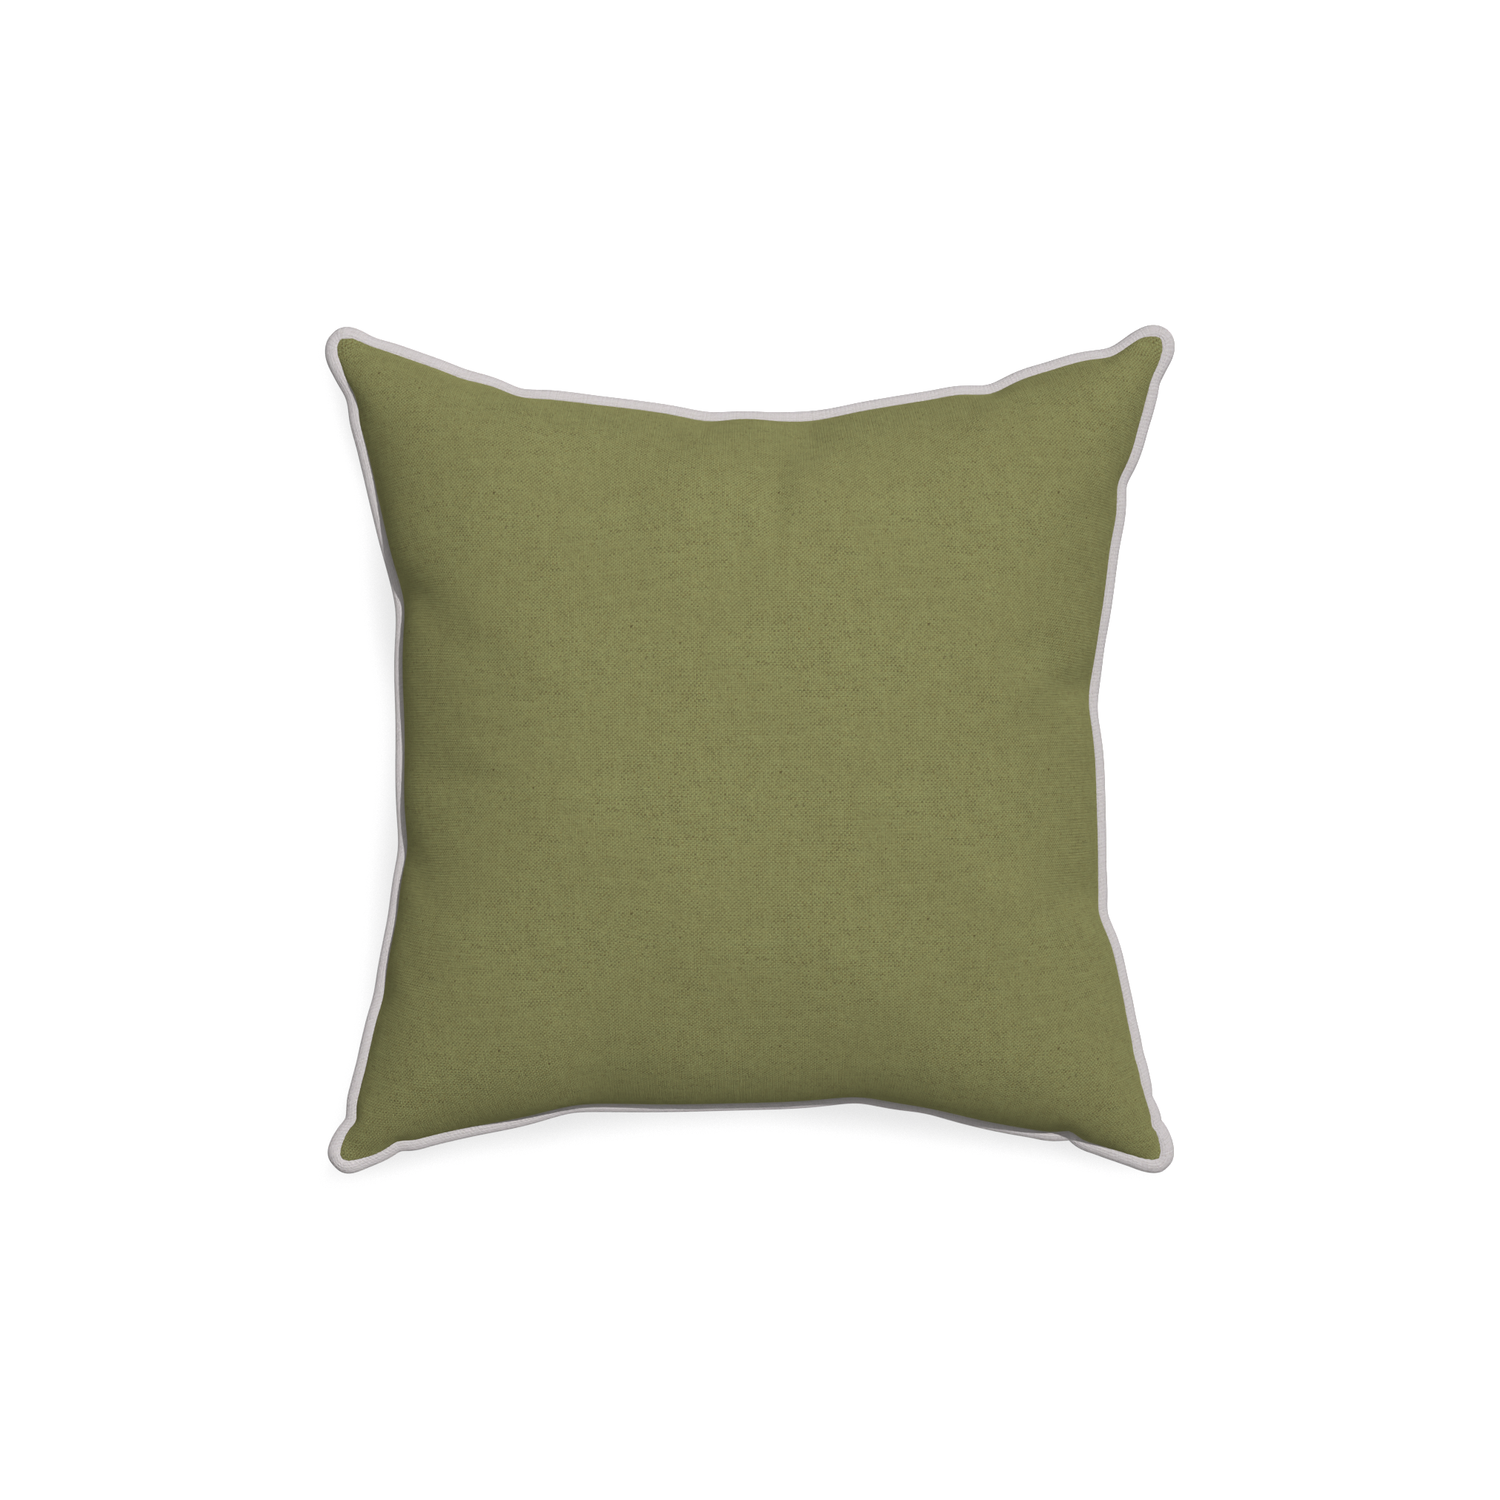 18-square moss custom moss greenpillow with pebble piping on white background